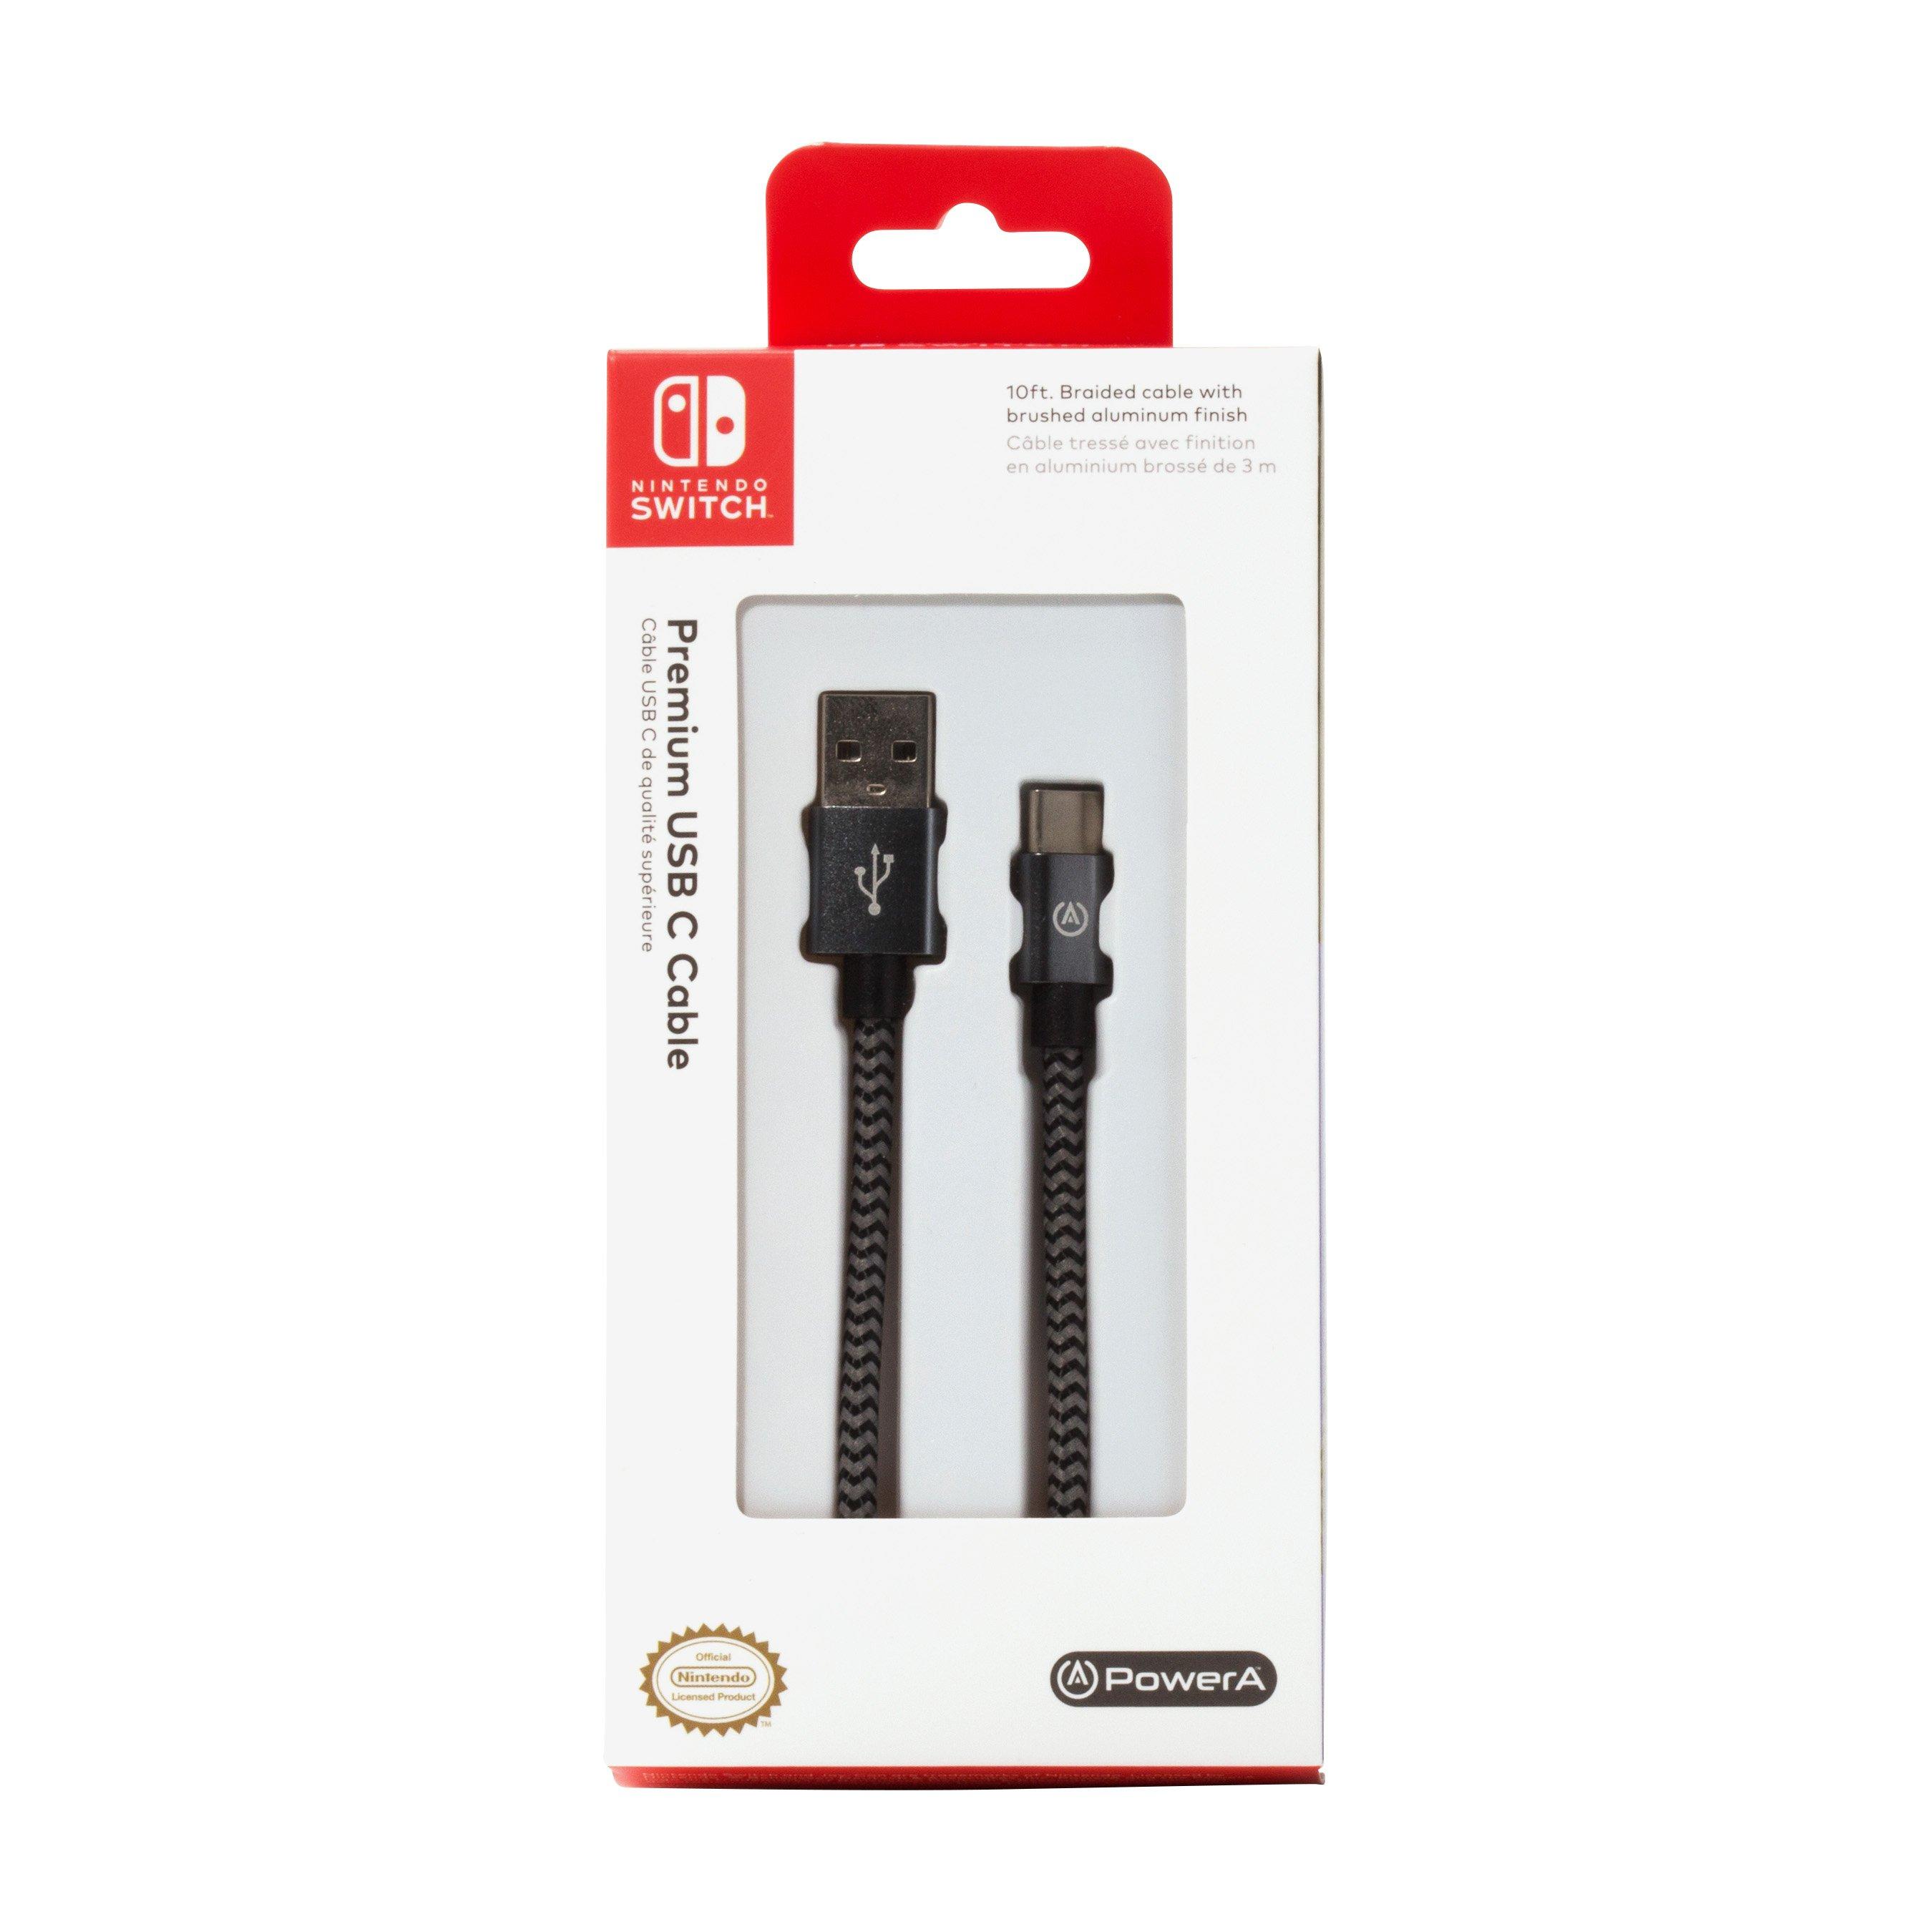 nintendo switch cord charger